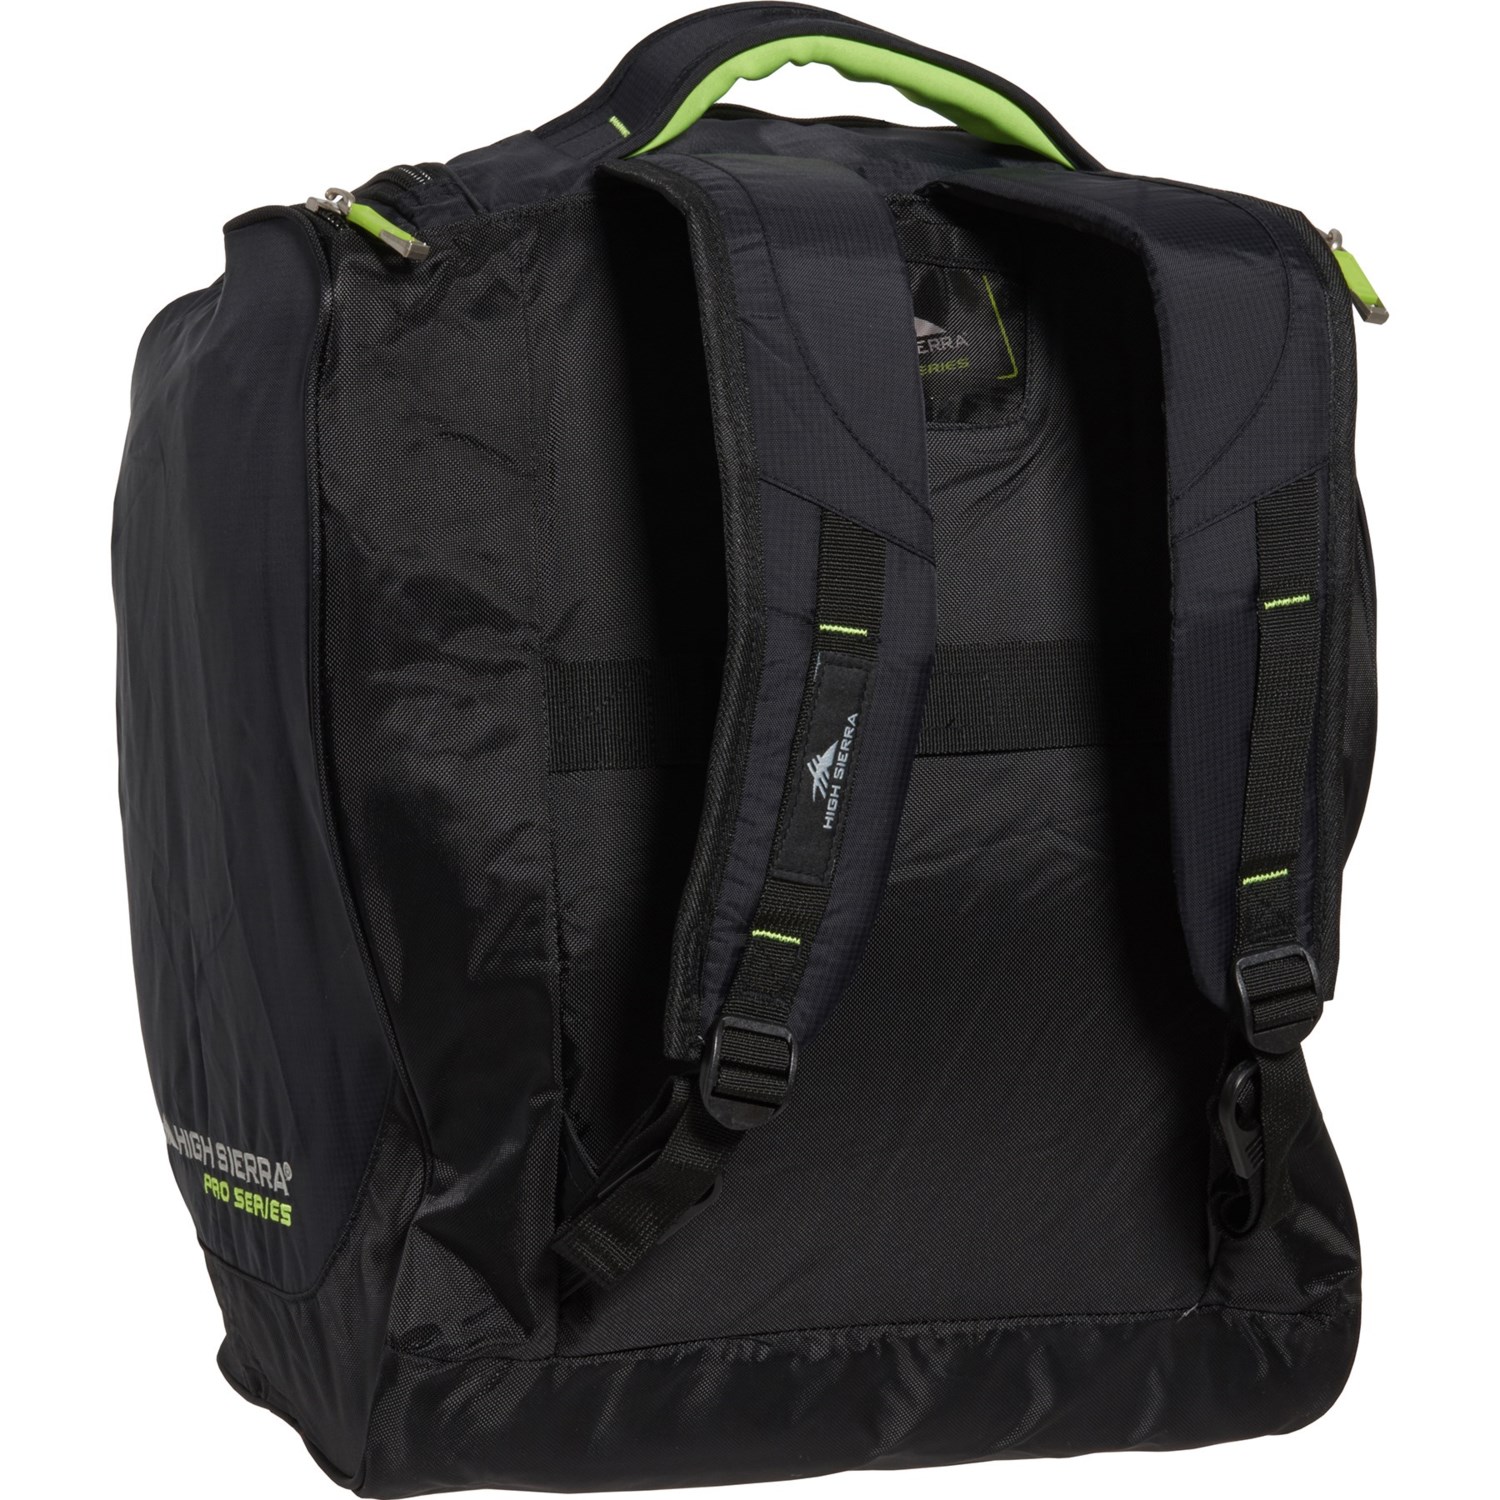 High Sierra Deluxe Trapezoid Boot Bag 